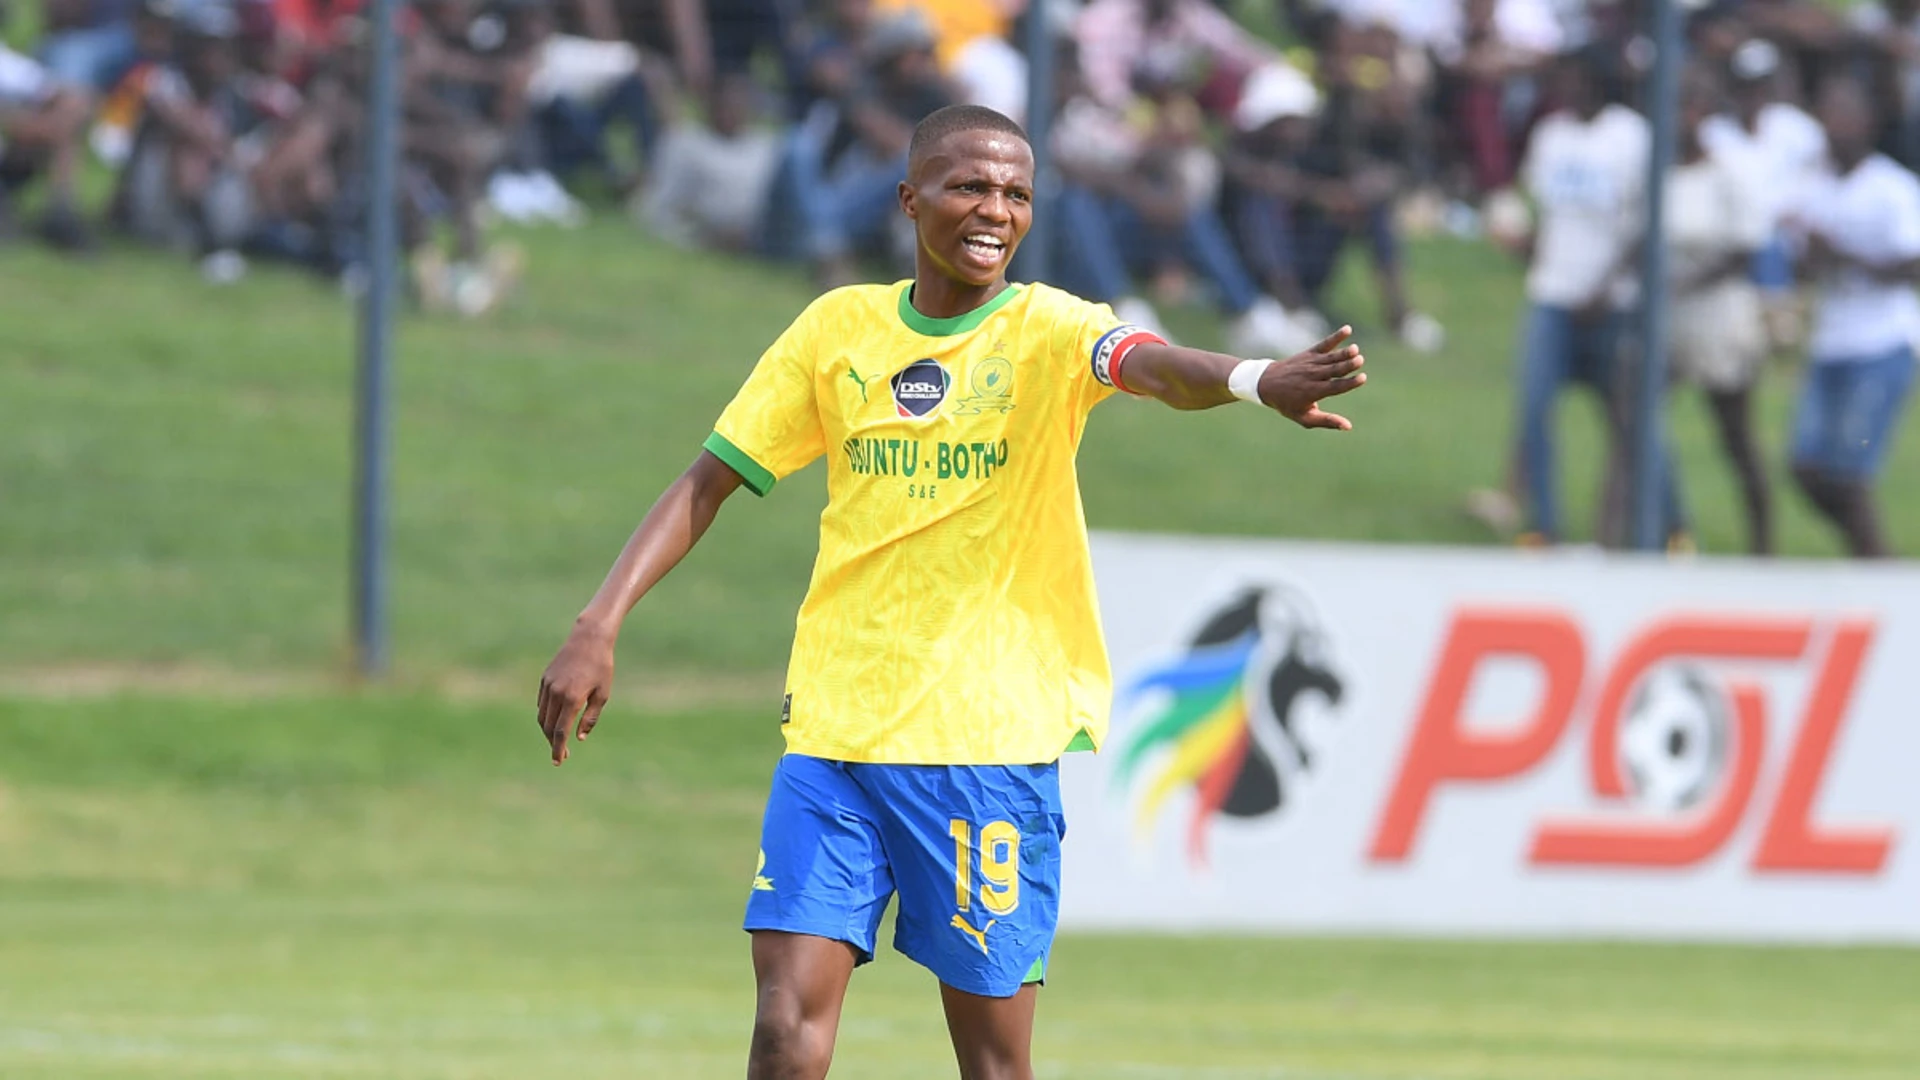 The best is yet to come from Nkosi - Downs coach Badela